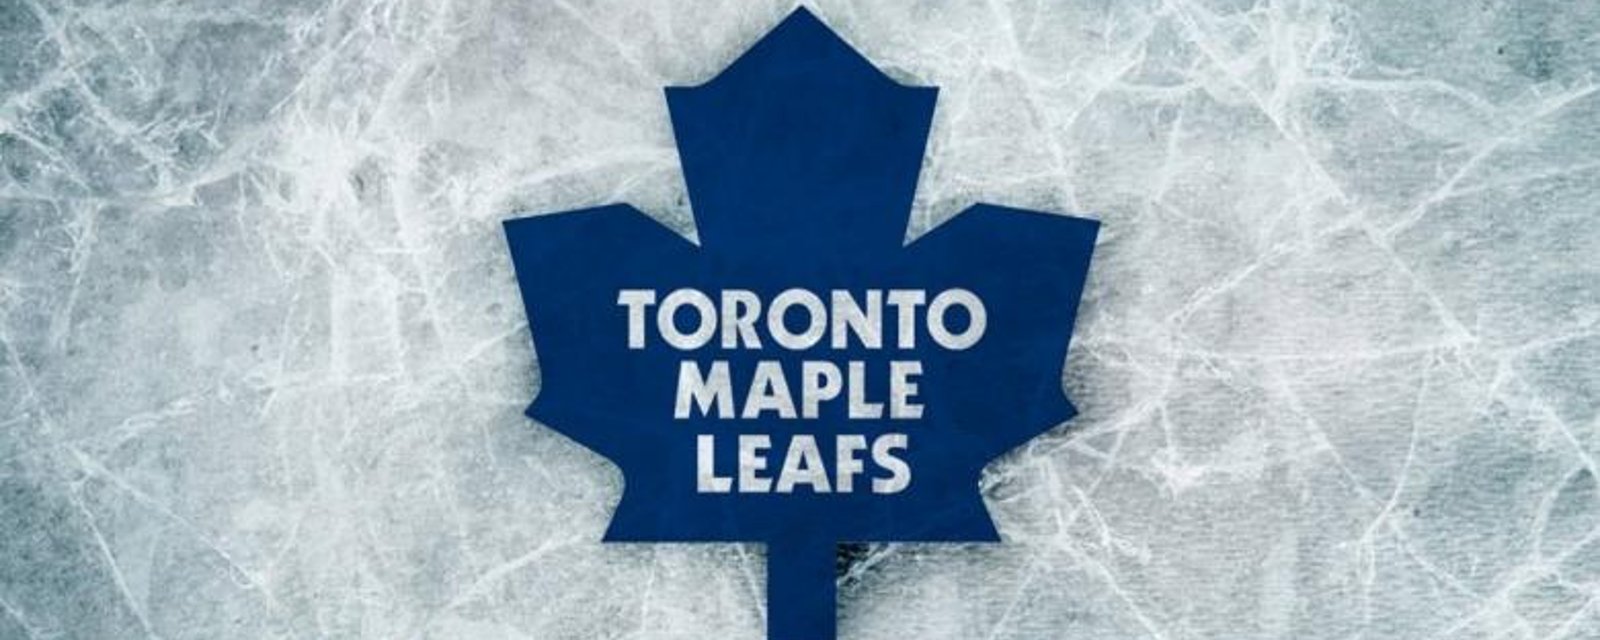 Breaking: The new Maple Leafs uniforms have been leaked!